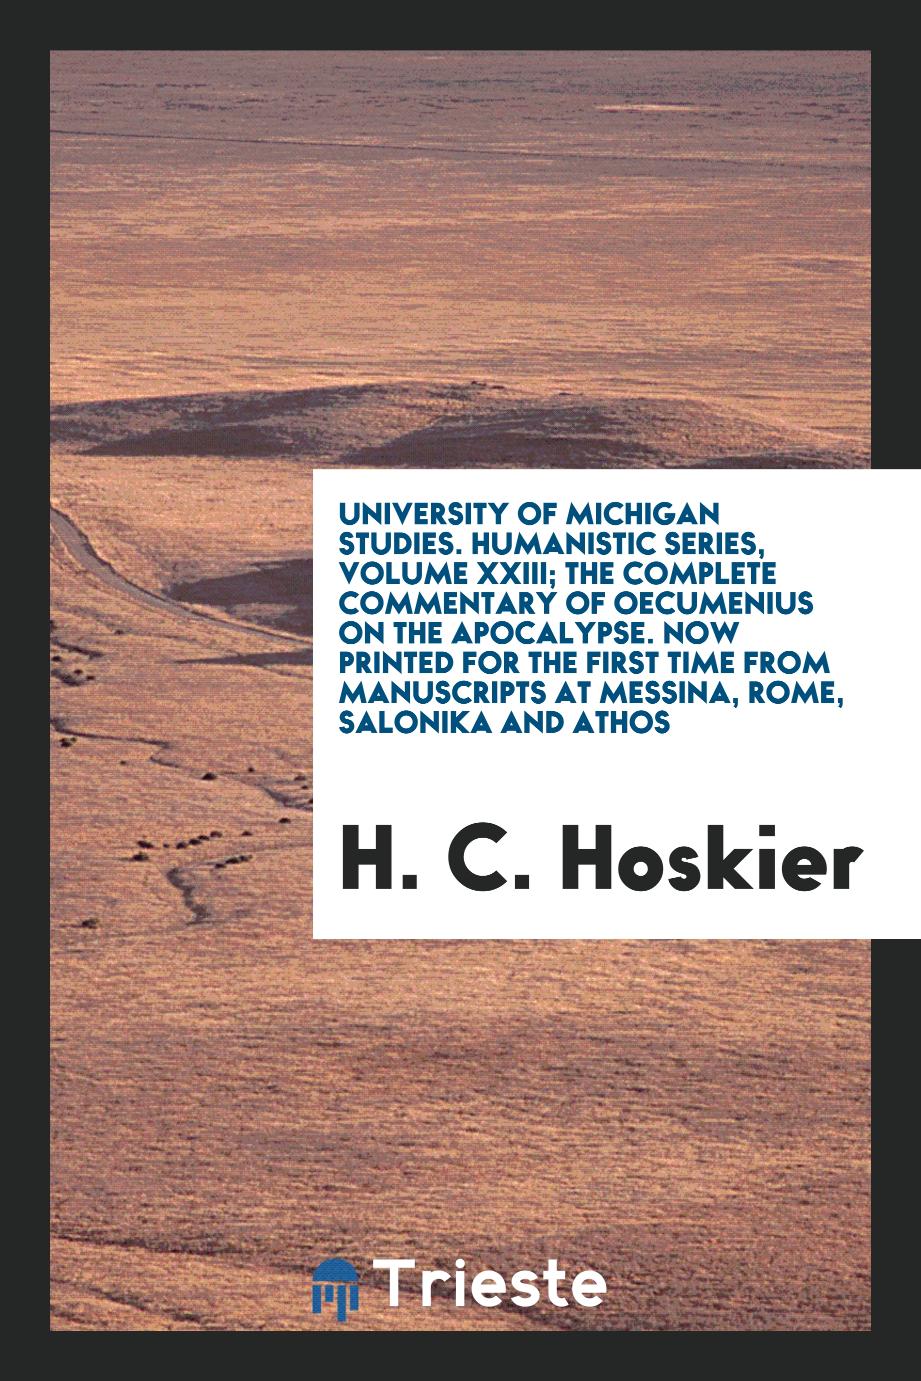 University of Michigan Studies. Humanistic Series, Volume XXIII; The Complete Commentary of Oecumenius on the Apocalypse. Now Printed for the First Time from Manuscripts at Messina, Rome, Salonika and Athos